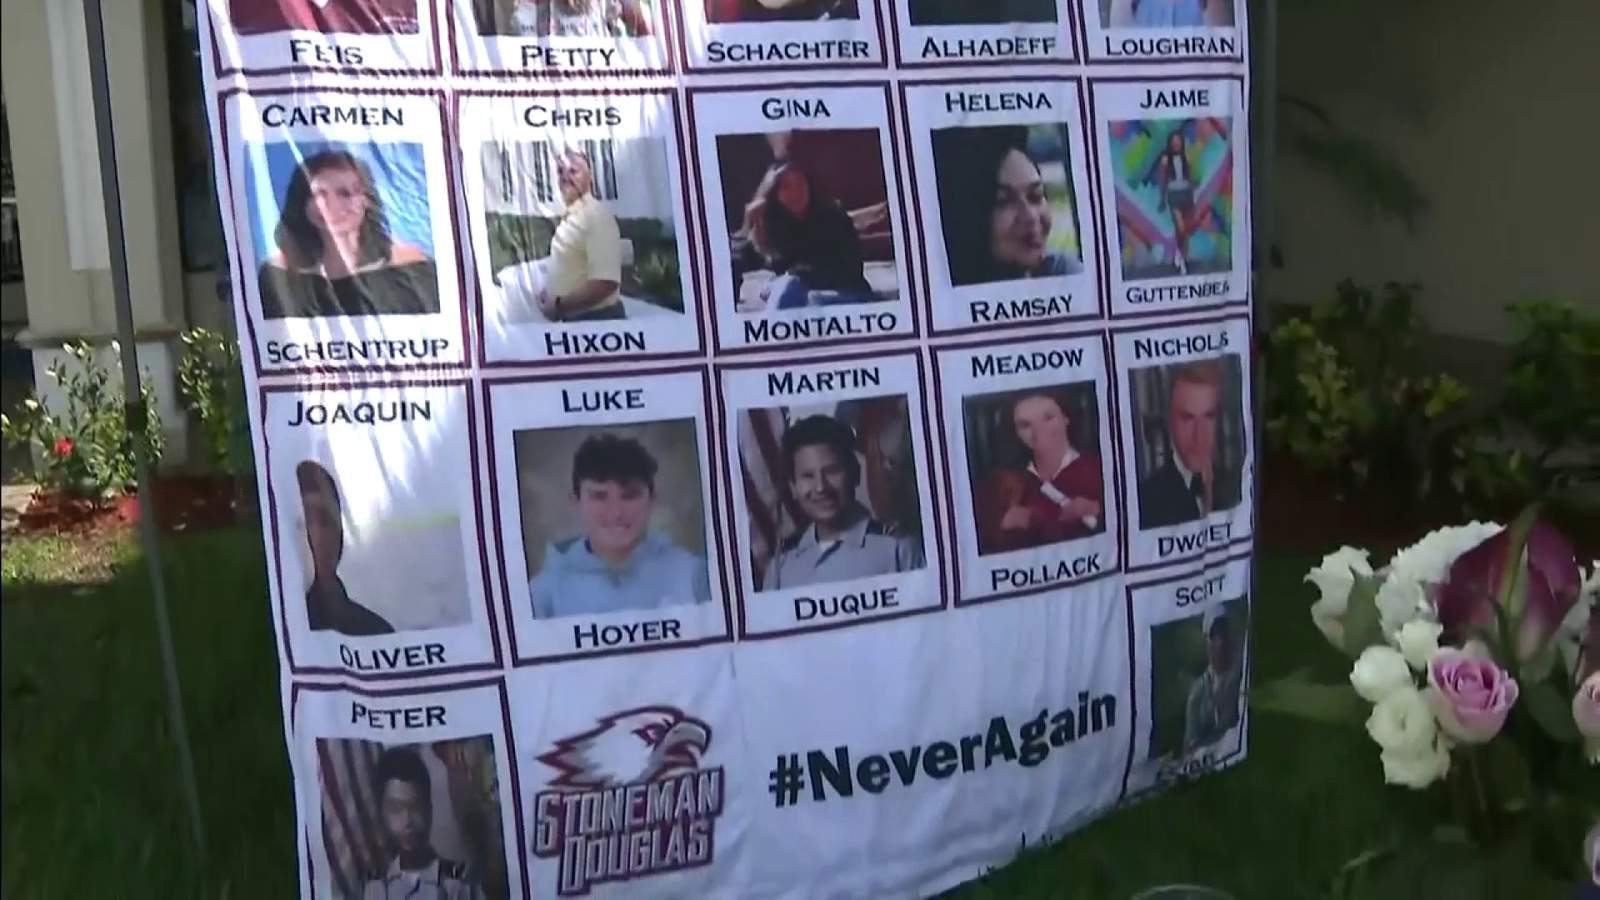 Exactly three years later, events and memorials held to honor victims of Parkland shooting